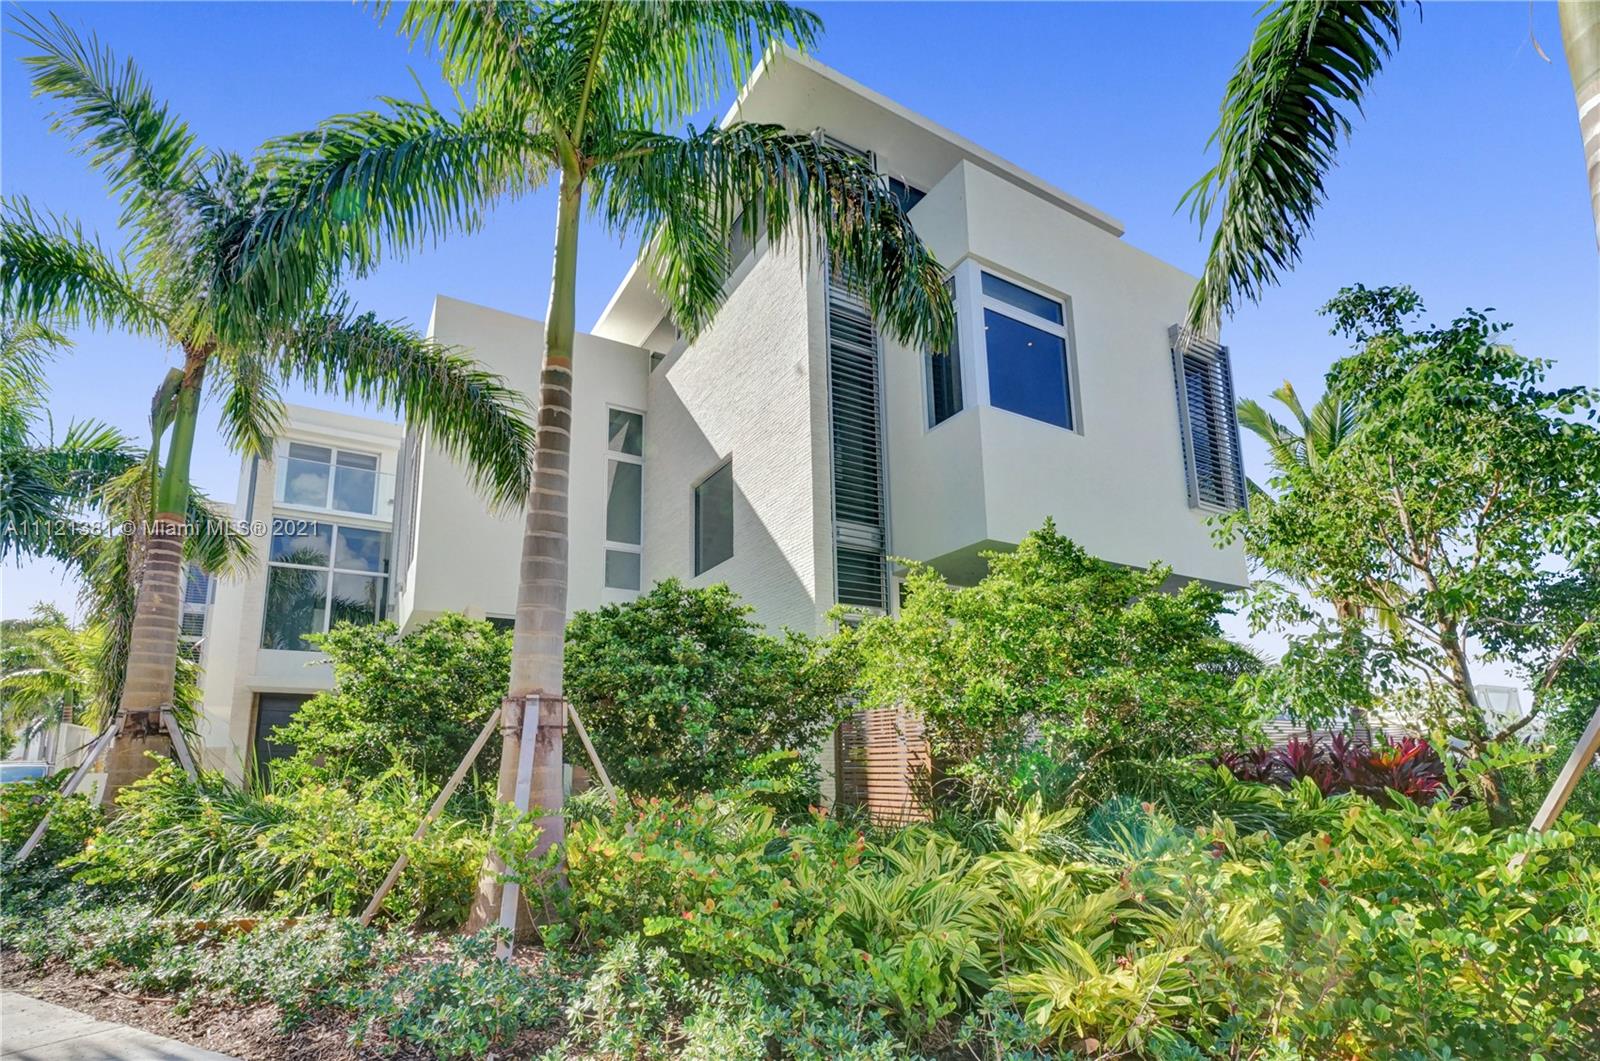 PUBLIC OPEN HOUSE SUNDAY 12/19 from 12-3PM!Never lived-in luxurious 3-story waterfront corner townhome, natural light shining thru 12ft floor-to-ceiling, impact windows. Enter thru the foyer into the open kitchen overlooking the living room & spacious terrace w/ marina views. Kitchen by MiaCucina w/ Wolf appliances, quartz countertops, subzero integrated refrigerator, & wine cooler on the oversized island. Private elevator. This large home, great for entertaining, has 4 BR + staff quarters & 5.5 BA. Rooftop terrace. Enjoy 1,473 Sq. Ft. of outdoor space with serene water views. Have the option to purchase a 90 ft. boat slip in front of your terrace for $250,000. Private two-car garage. Delight in the luxurious amenities at The Point: 3 pools, 4 tennis courts, 25,000 SqFt. Club & Spa